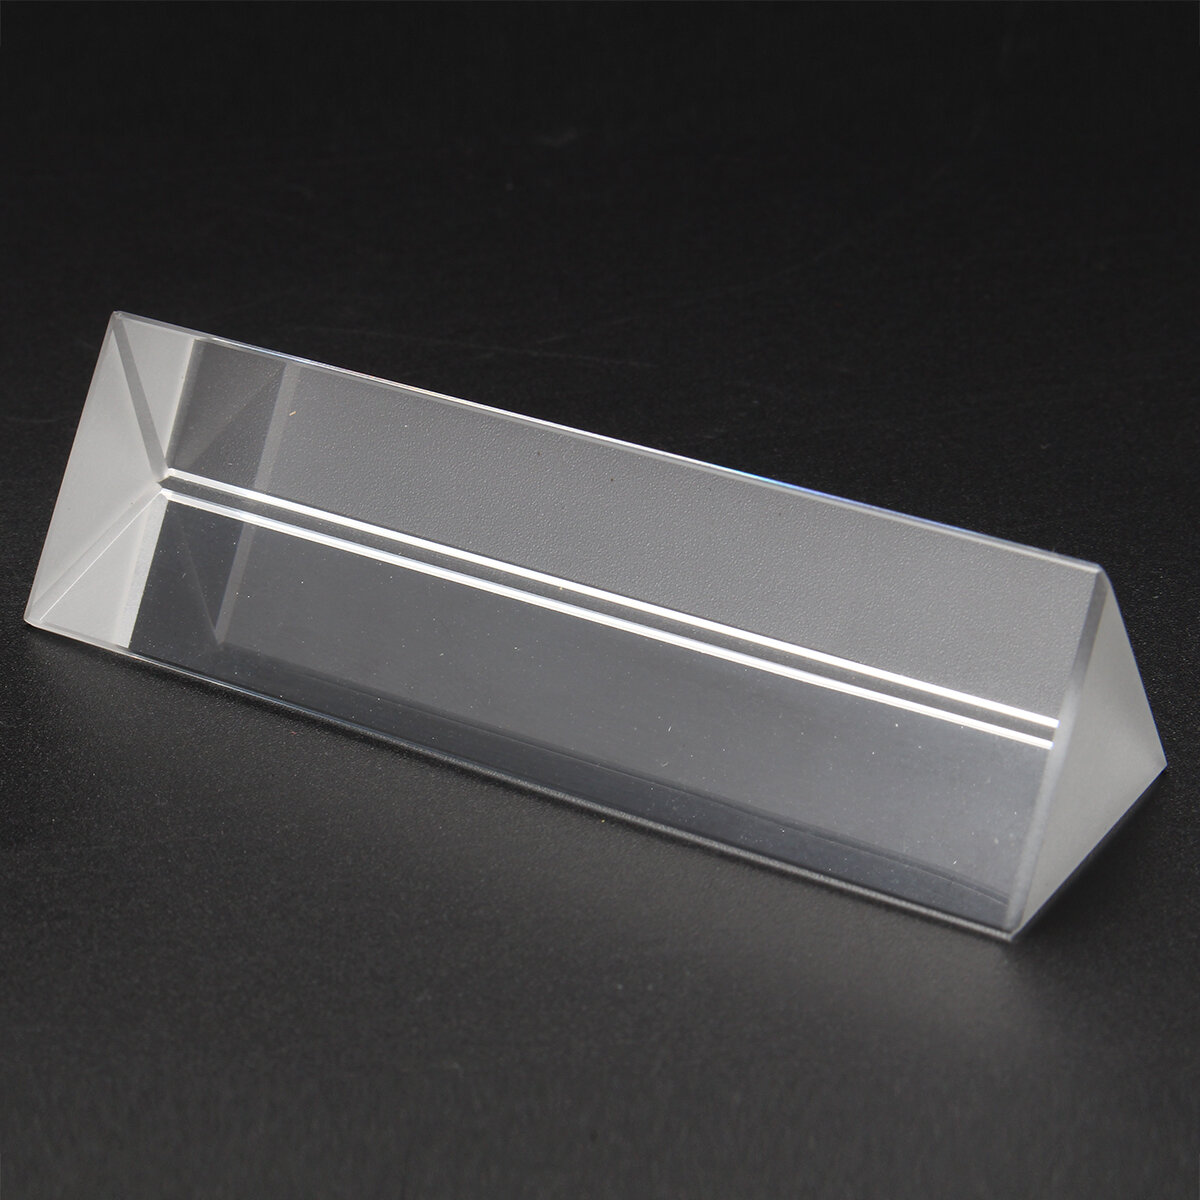 Optical Glass UK Triple Prism for Physical Light Spectrum Experimentmodel / woondecoratie